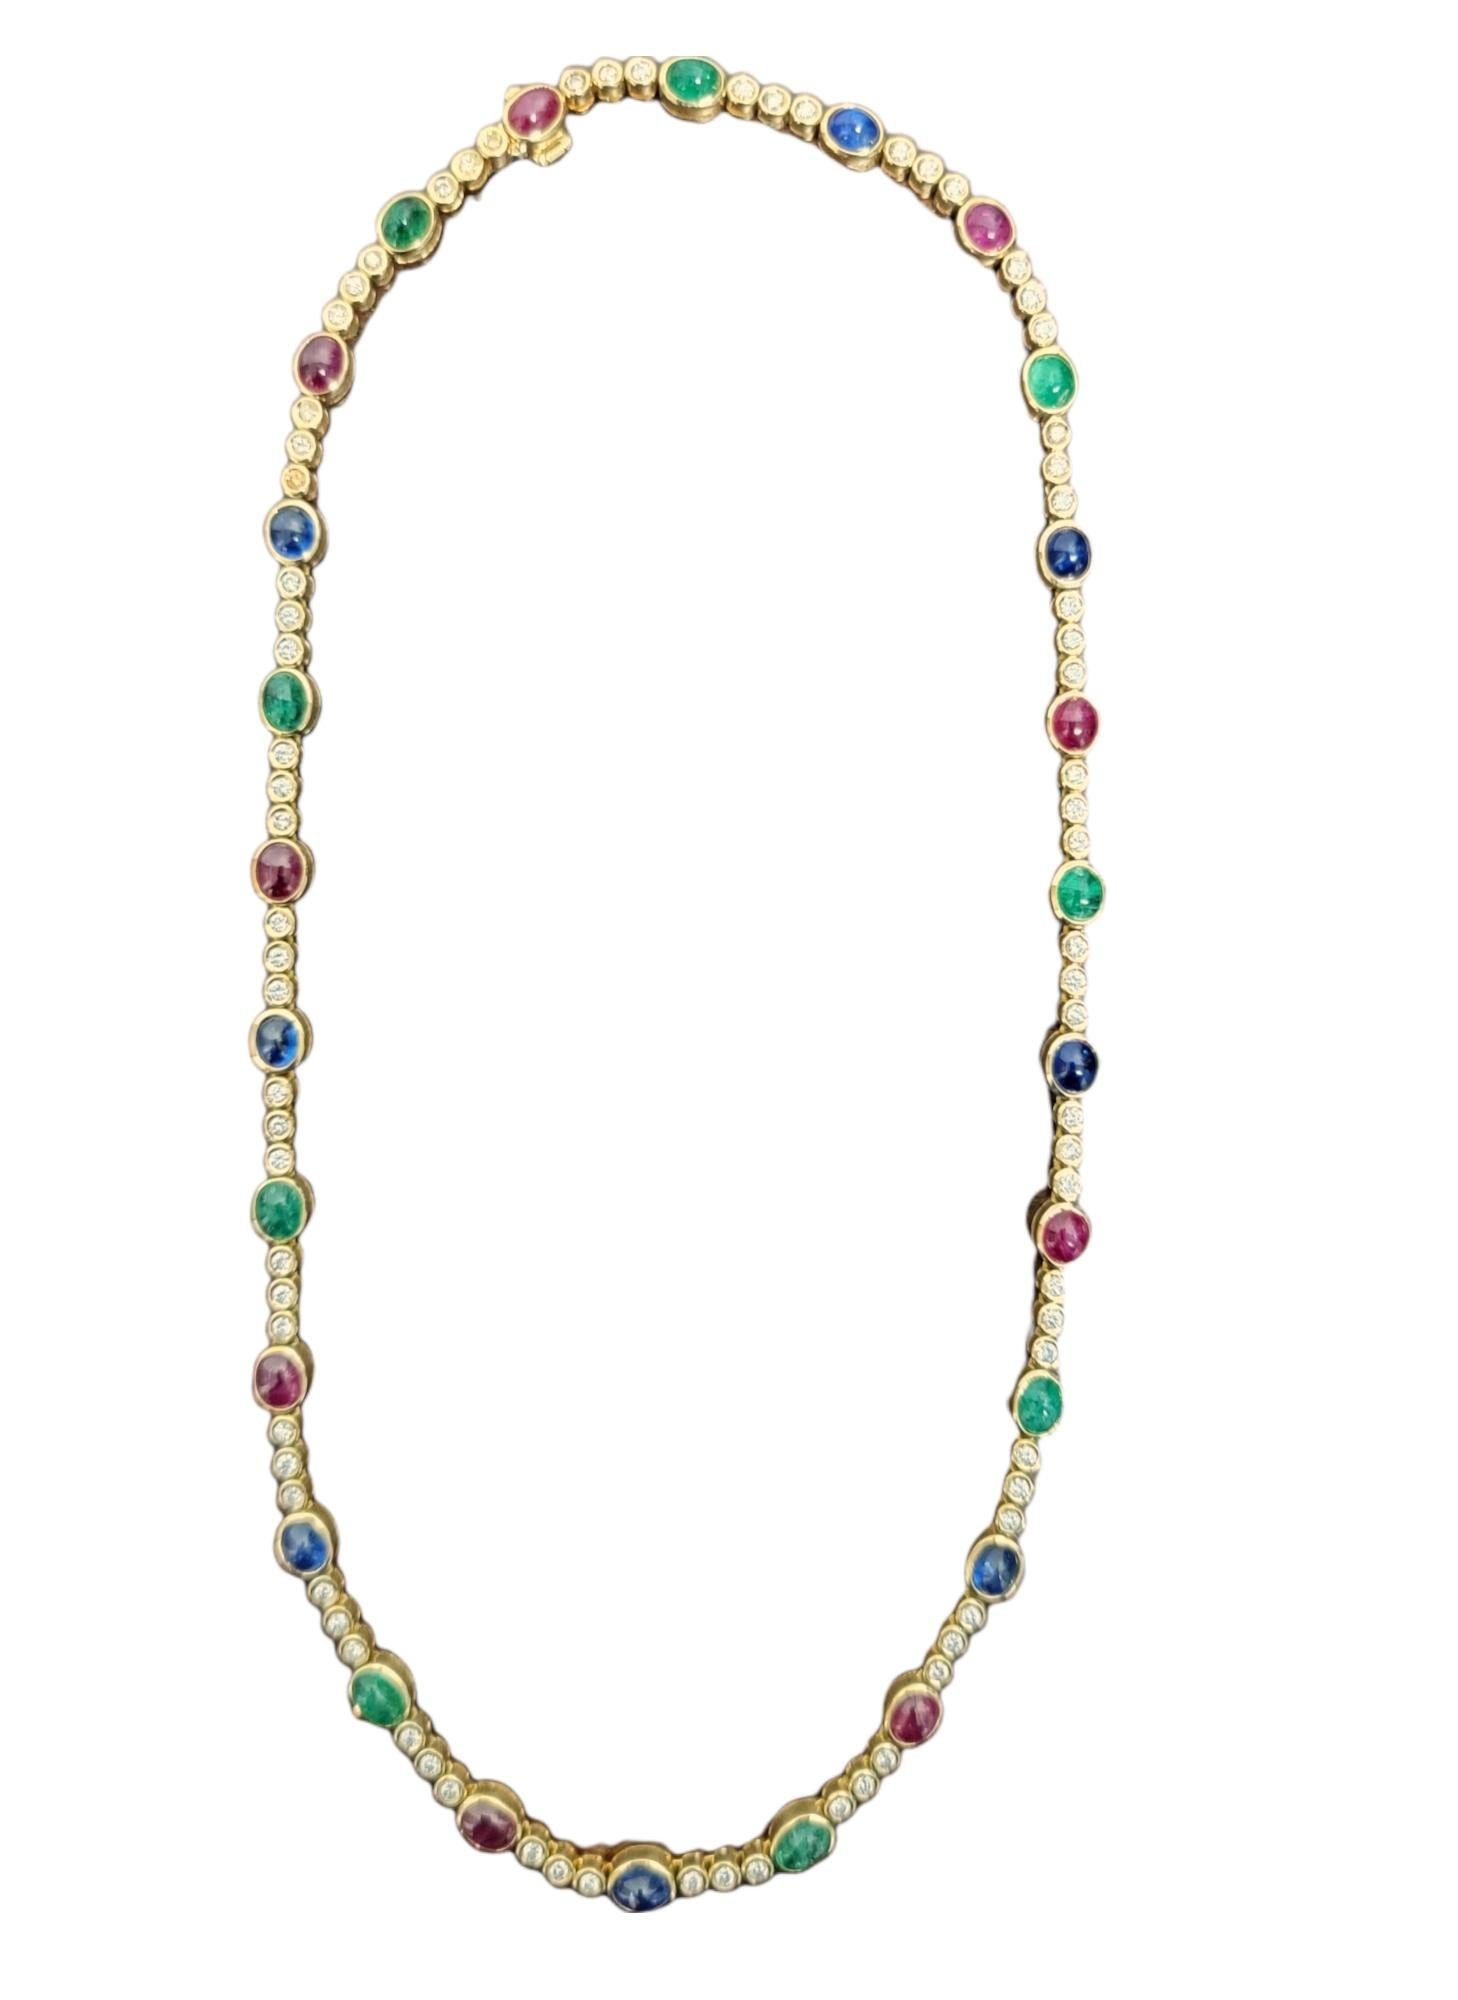 Colorful and elegant multi-gemstone choker style necklace. The rich, vibrant colors and bright, sparkling diamonds truly make this necklace shine on the neck. Oval cabochon shaped rubies, emeralds and sapphires are bezel set in polished 18 karat